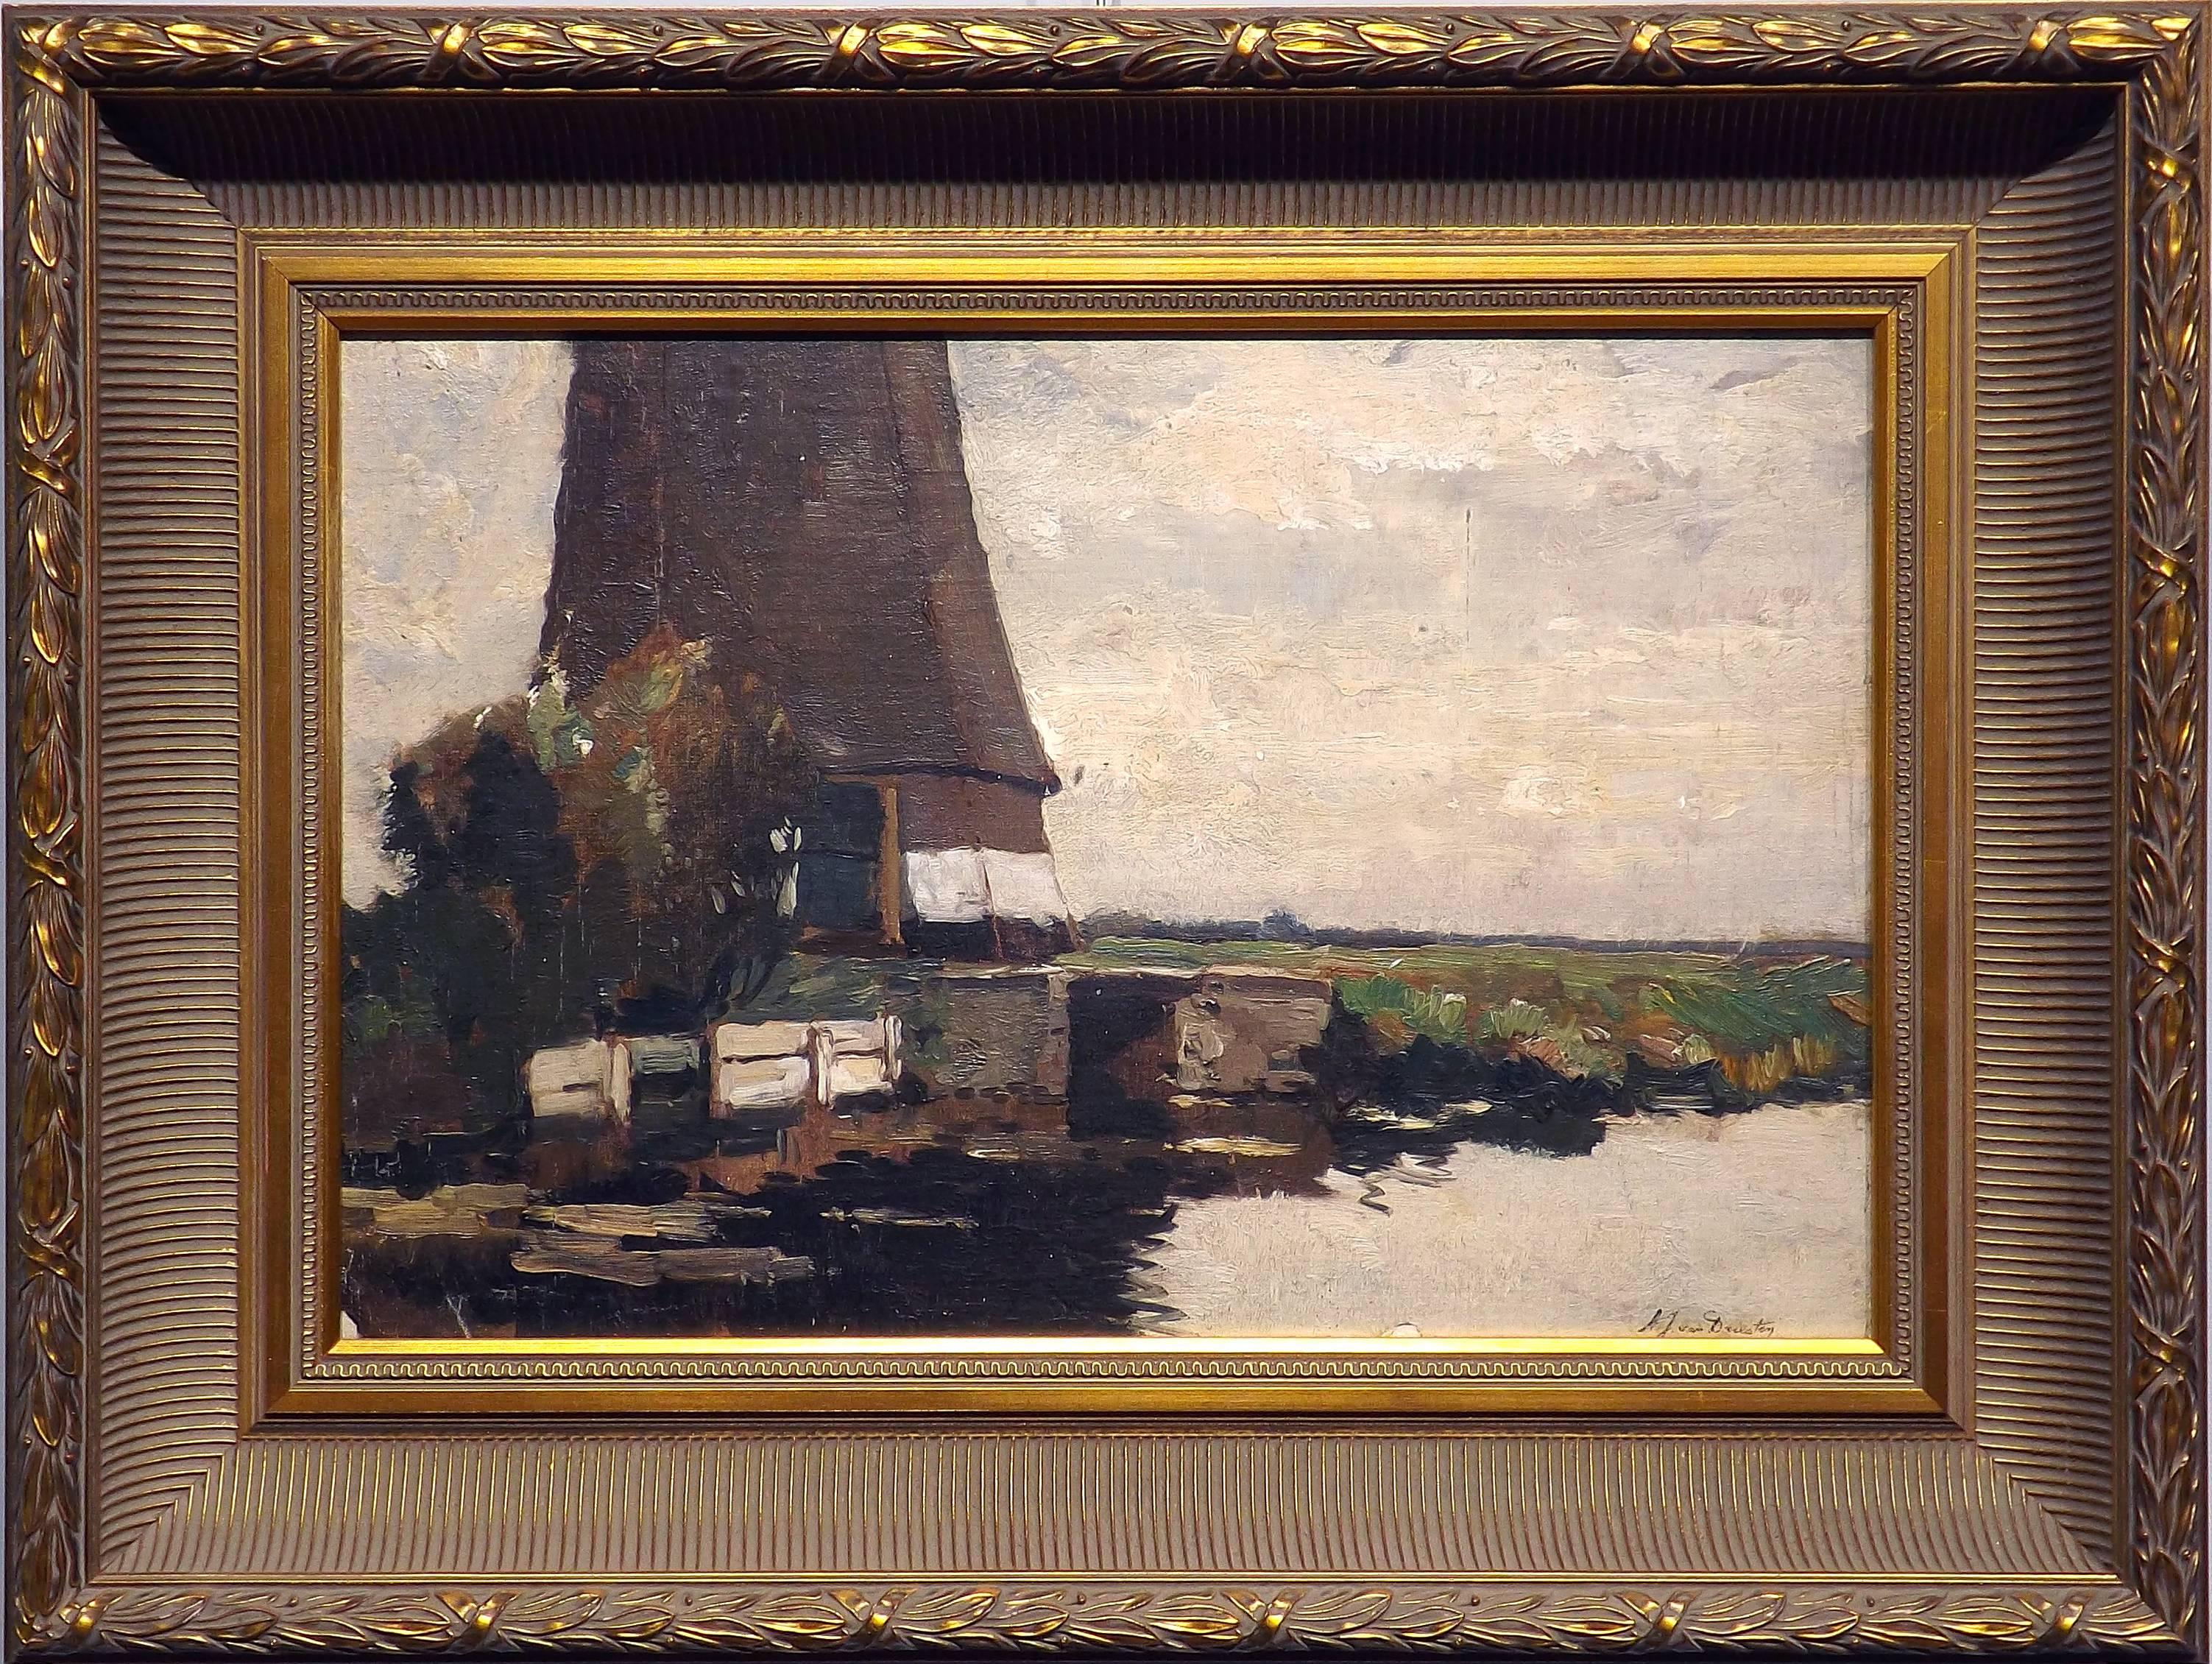 A wonderful composition of a Dutch windmill along a canal underneath a dark grey sky. Lush yet dreary landscape, and still reflecting water complete this atmospheric painting executed by listed artist Arend Jan van Driesten (1878-1969). 

Arend